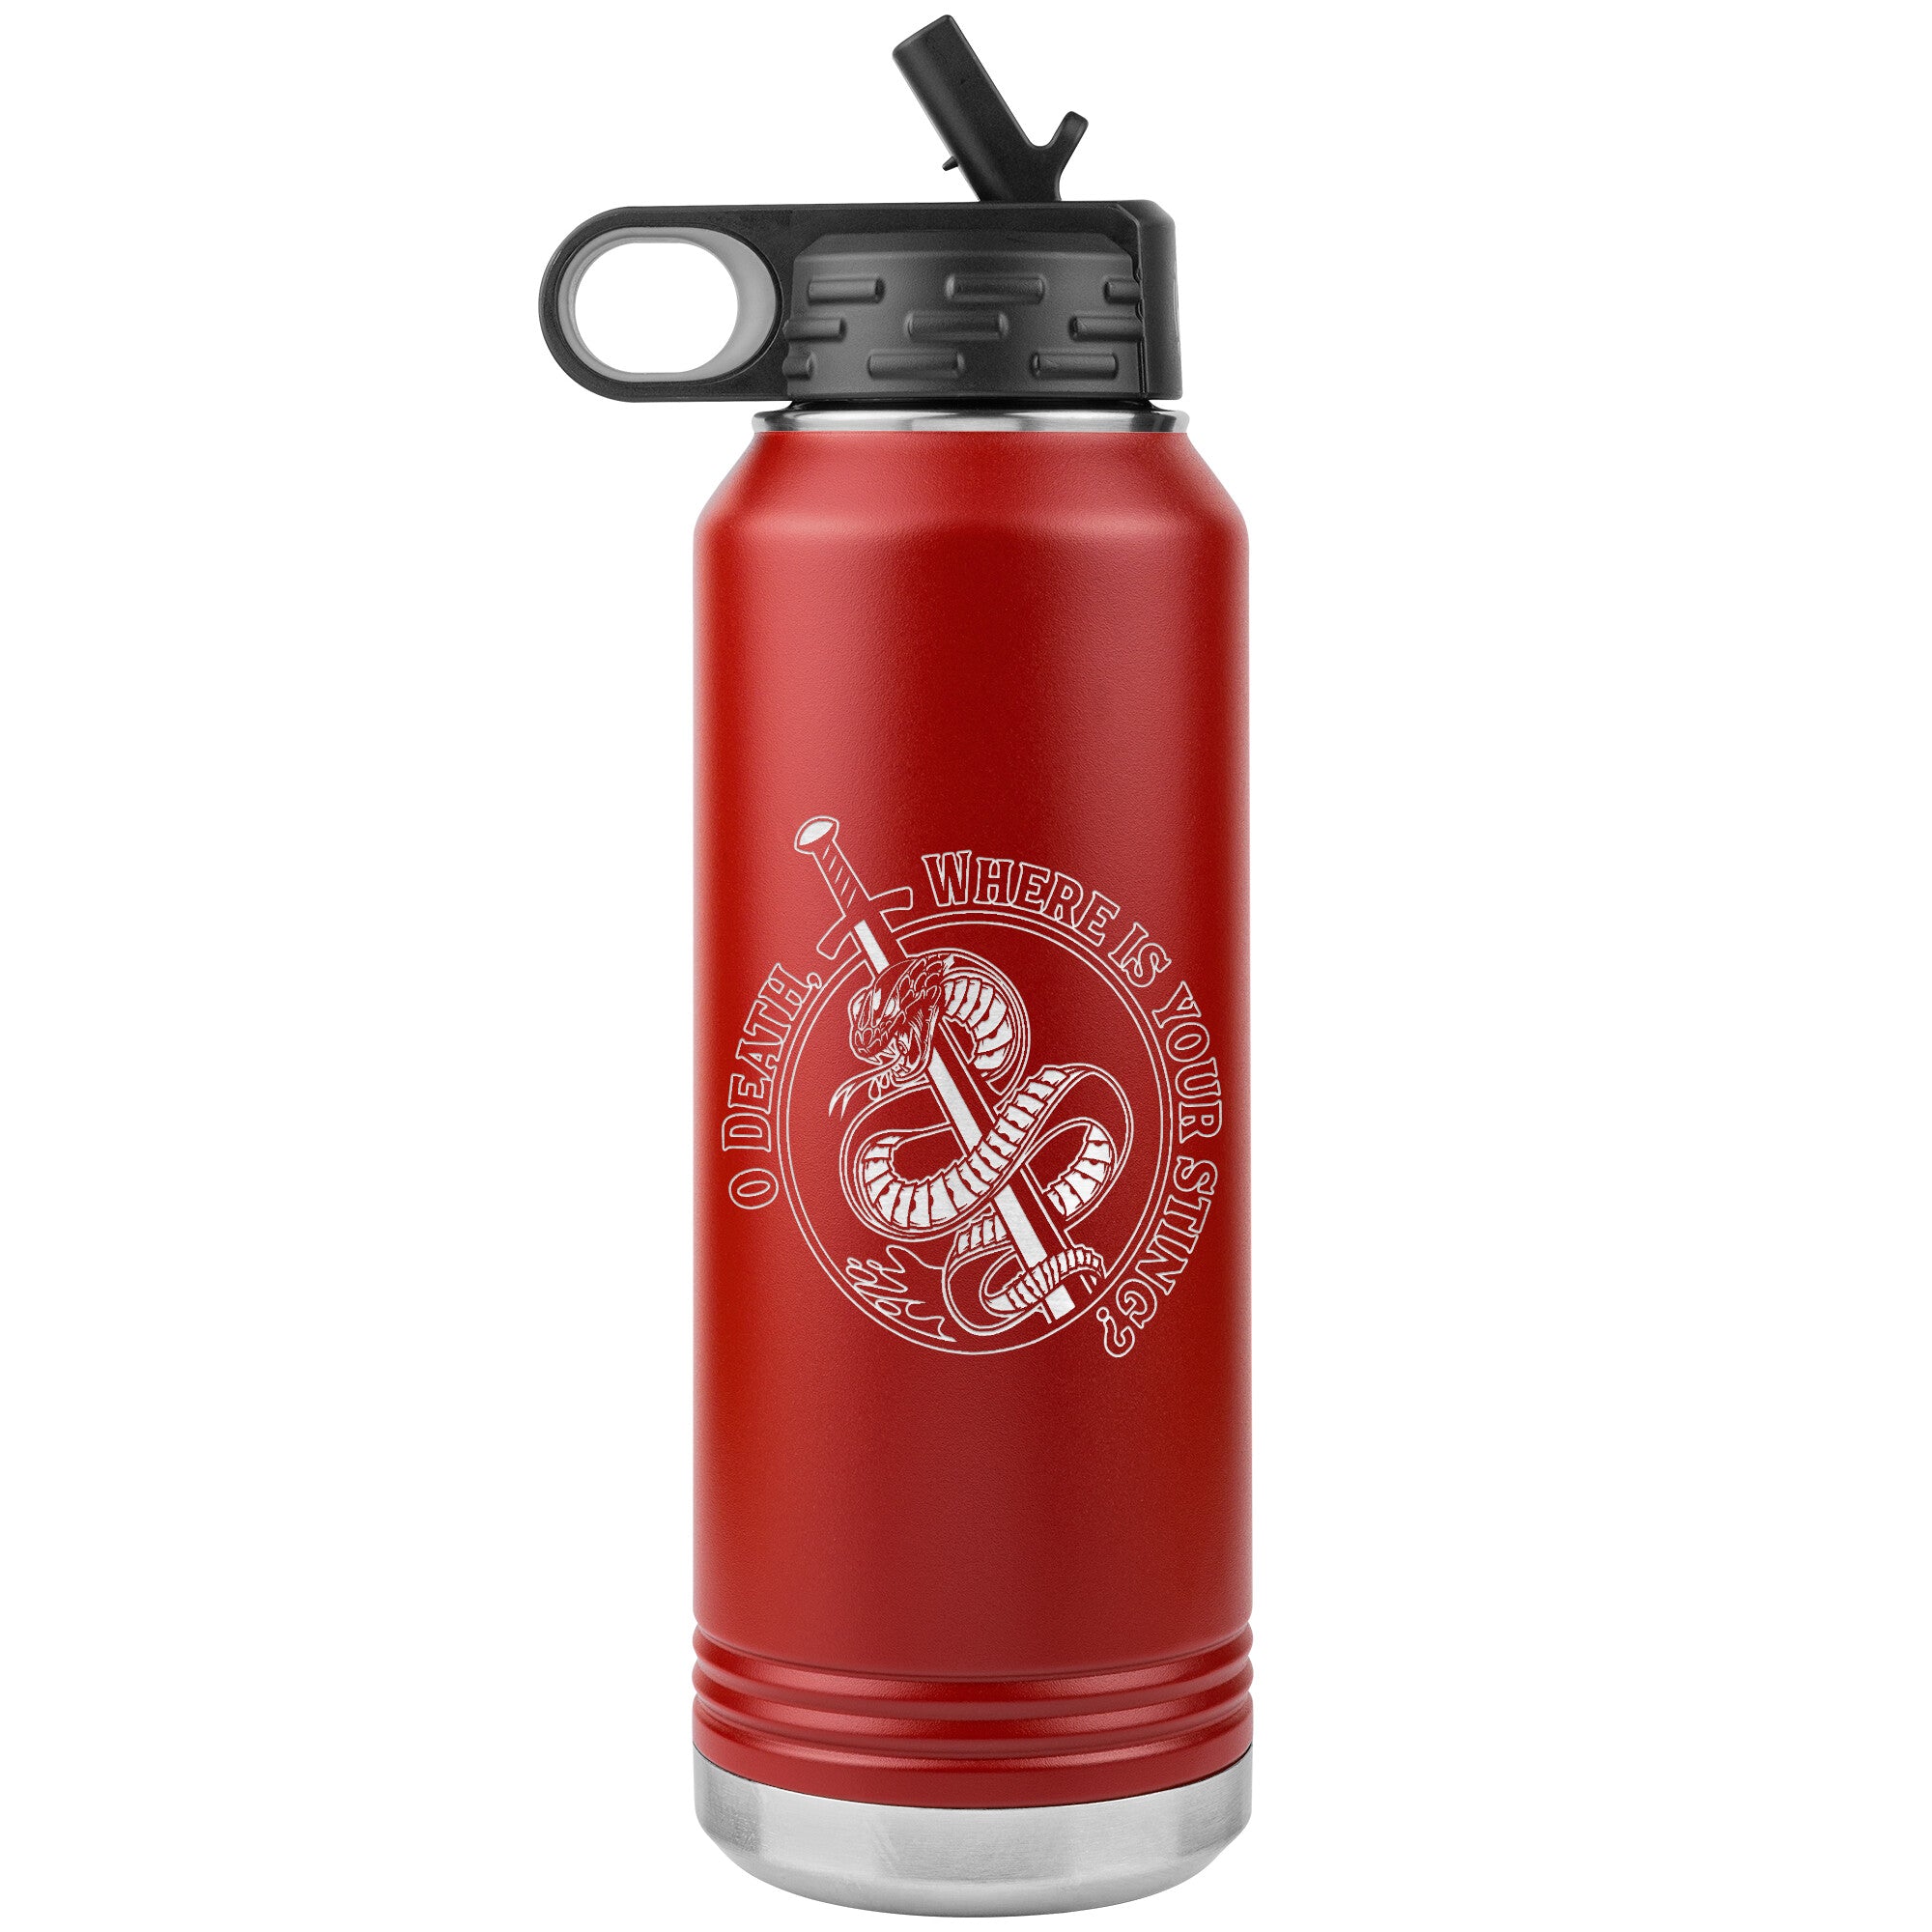 Where Is Your Sting? (32oz Bottle Tumbler)